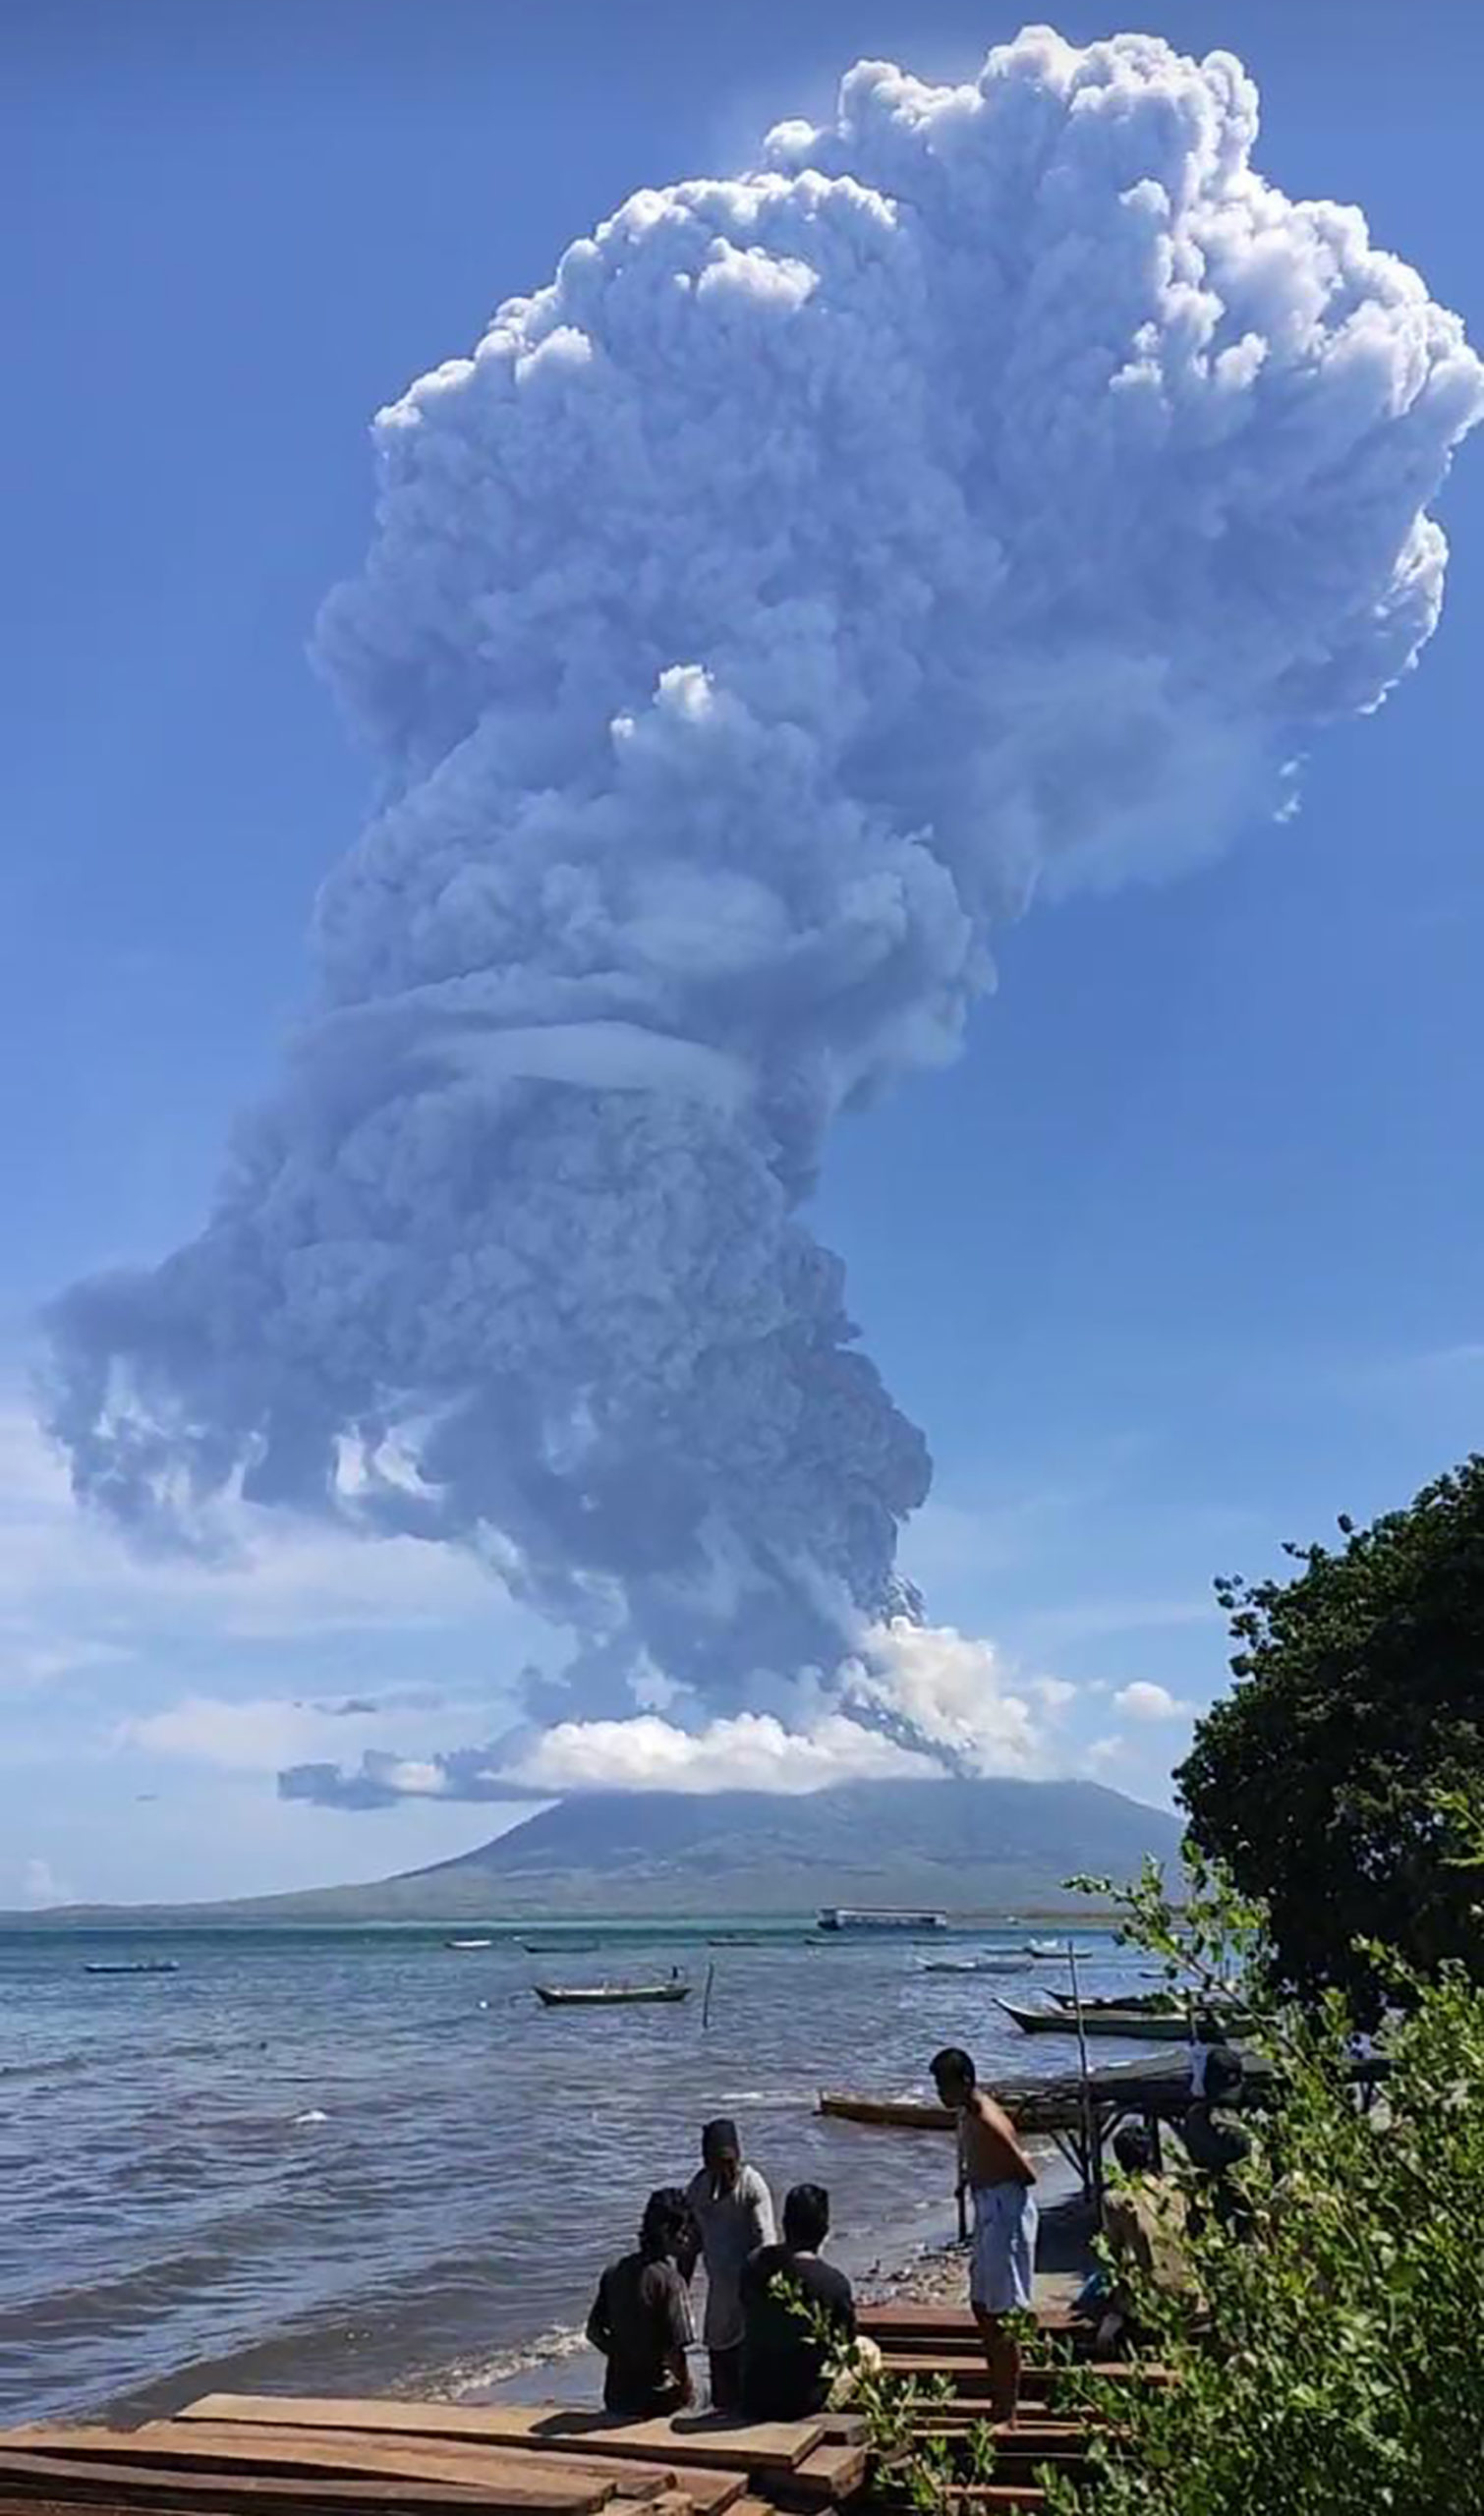 Residents gather to watch as Mount Ili Lewotolok spews ash during a volcanic eruption in Lembata, East Nusa Tenggara on November 29, 2020. (Photo by JOY CHRISTIAN / AFP)